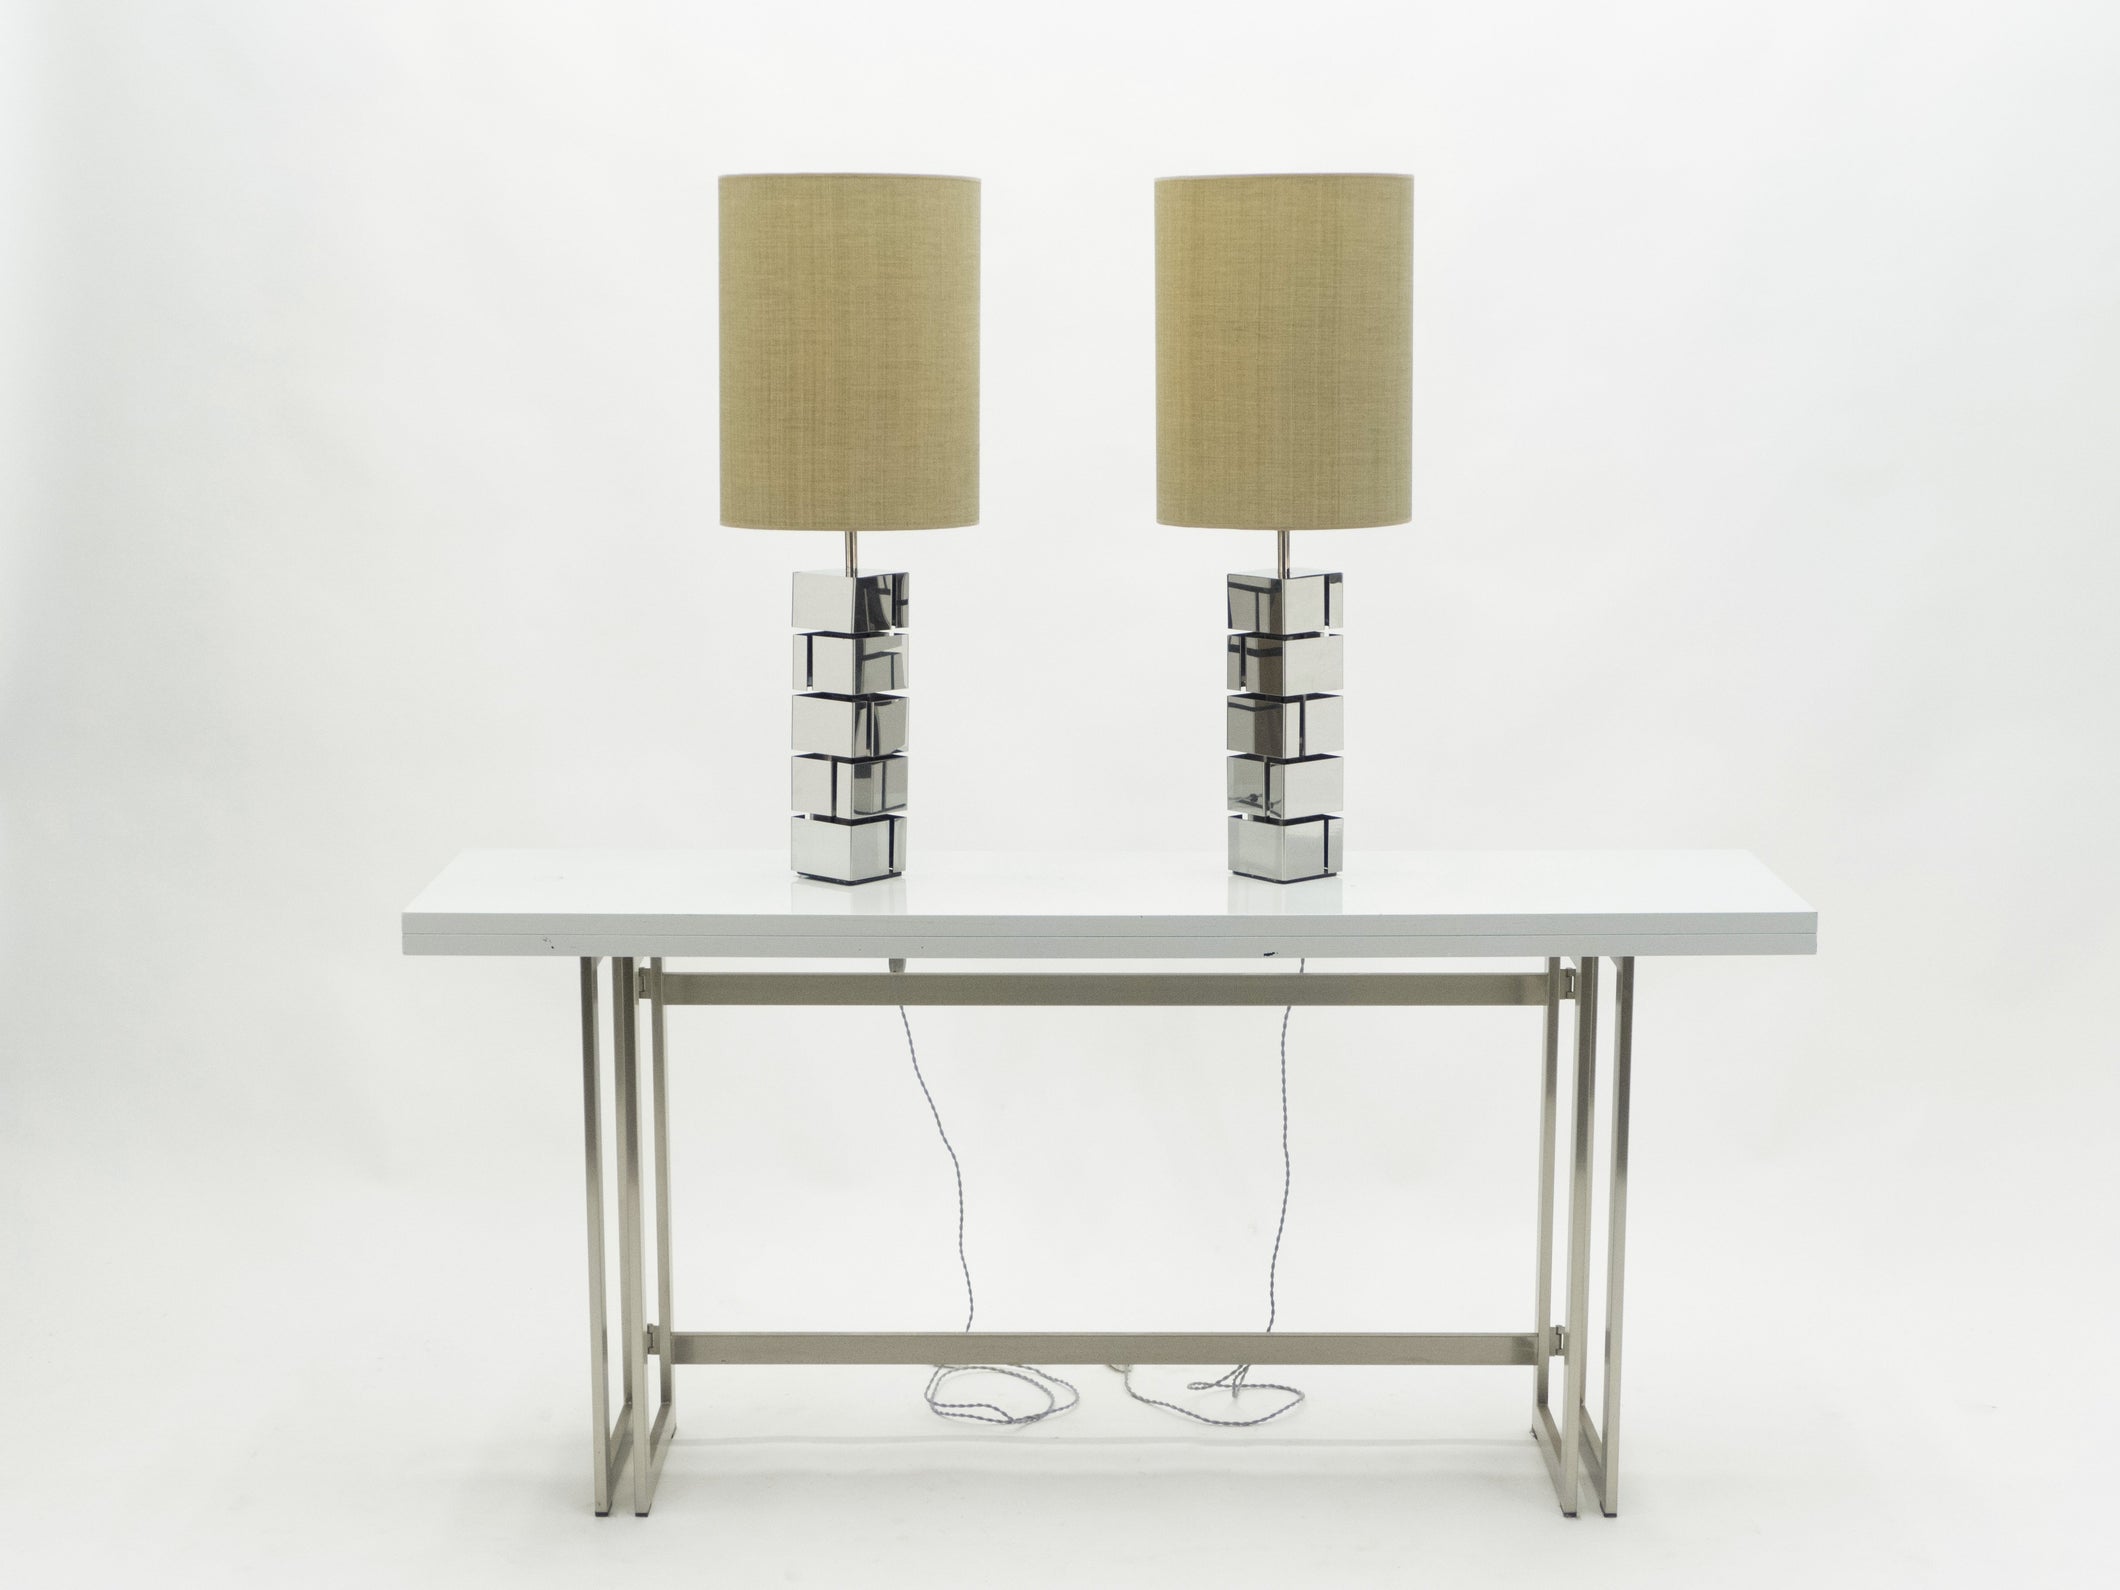 Pair of Mid-century Curtis Jere chrome lamps 1970s